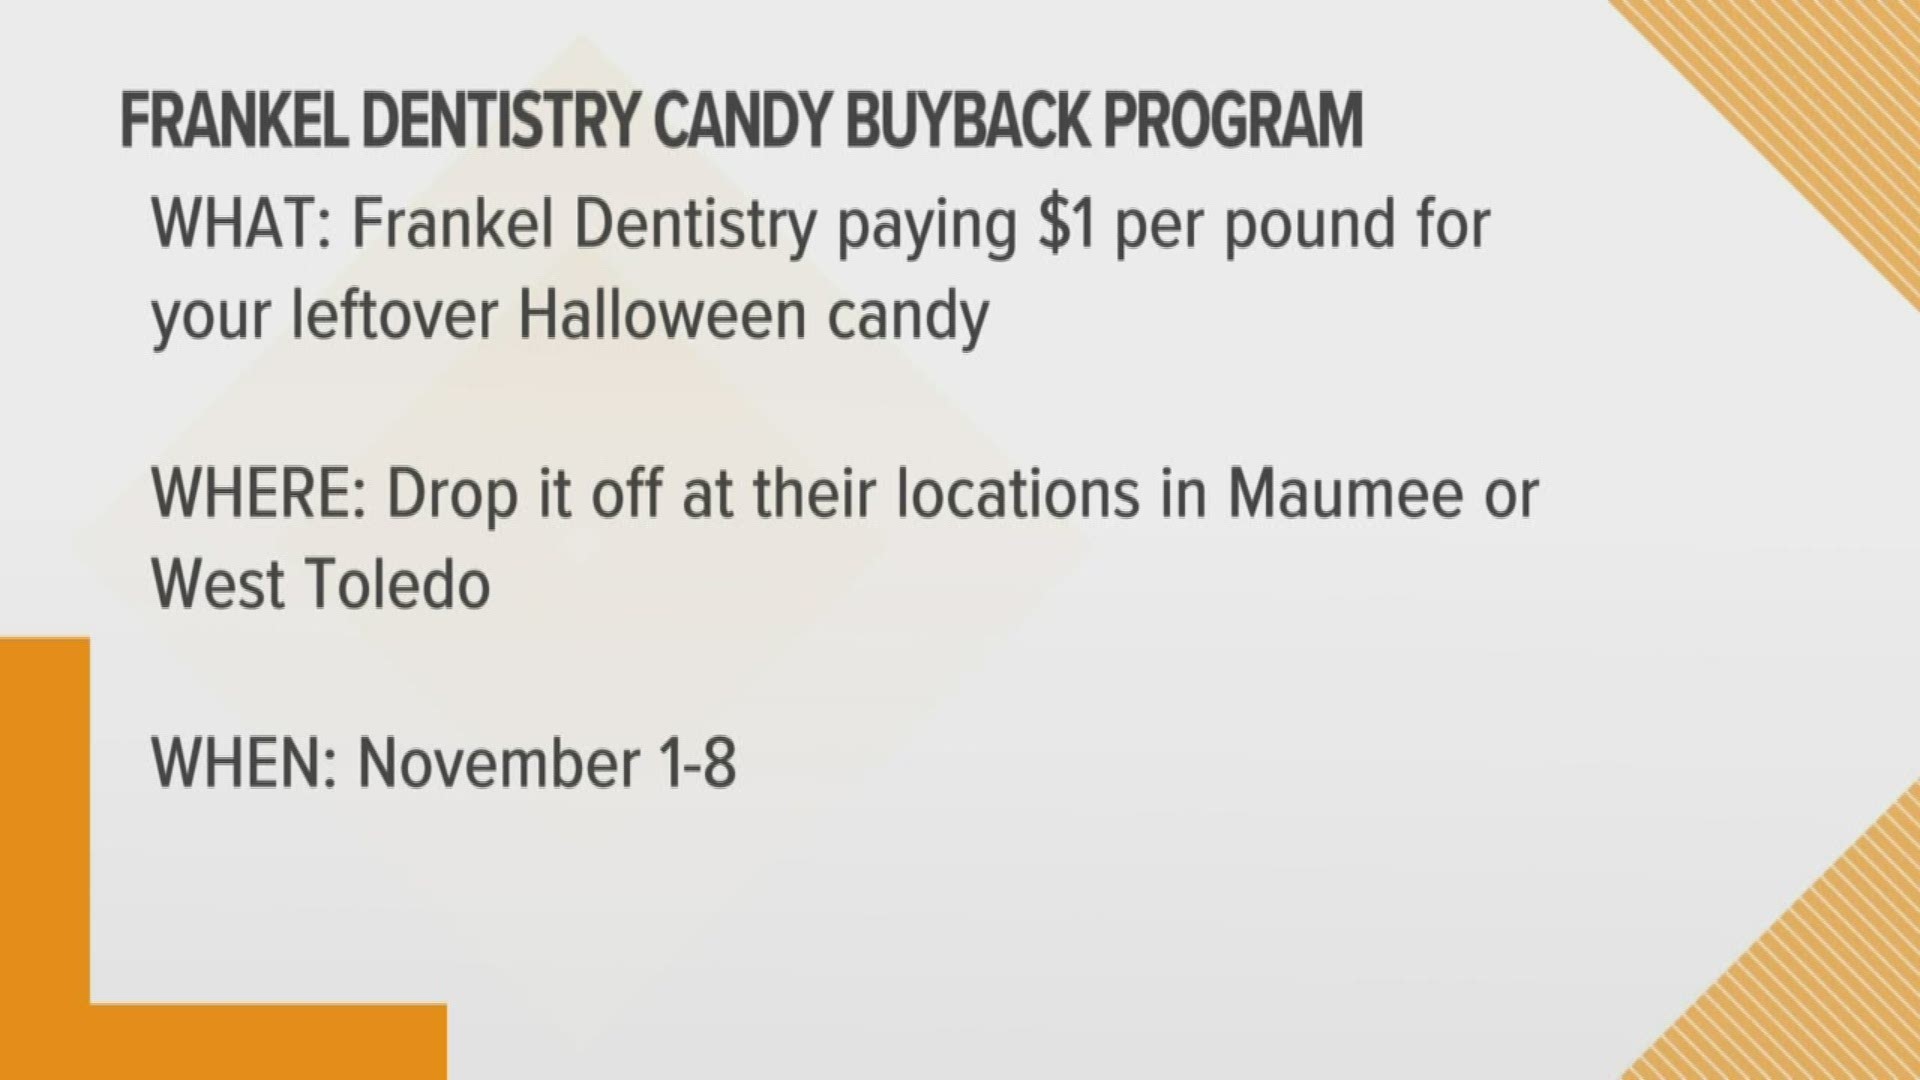 The offices will buy back candy for $1 per pound, and will donate all the candy to the troops deployed overseas.